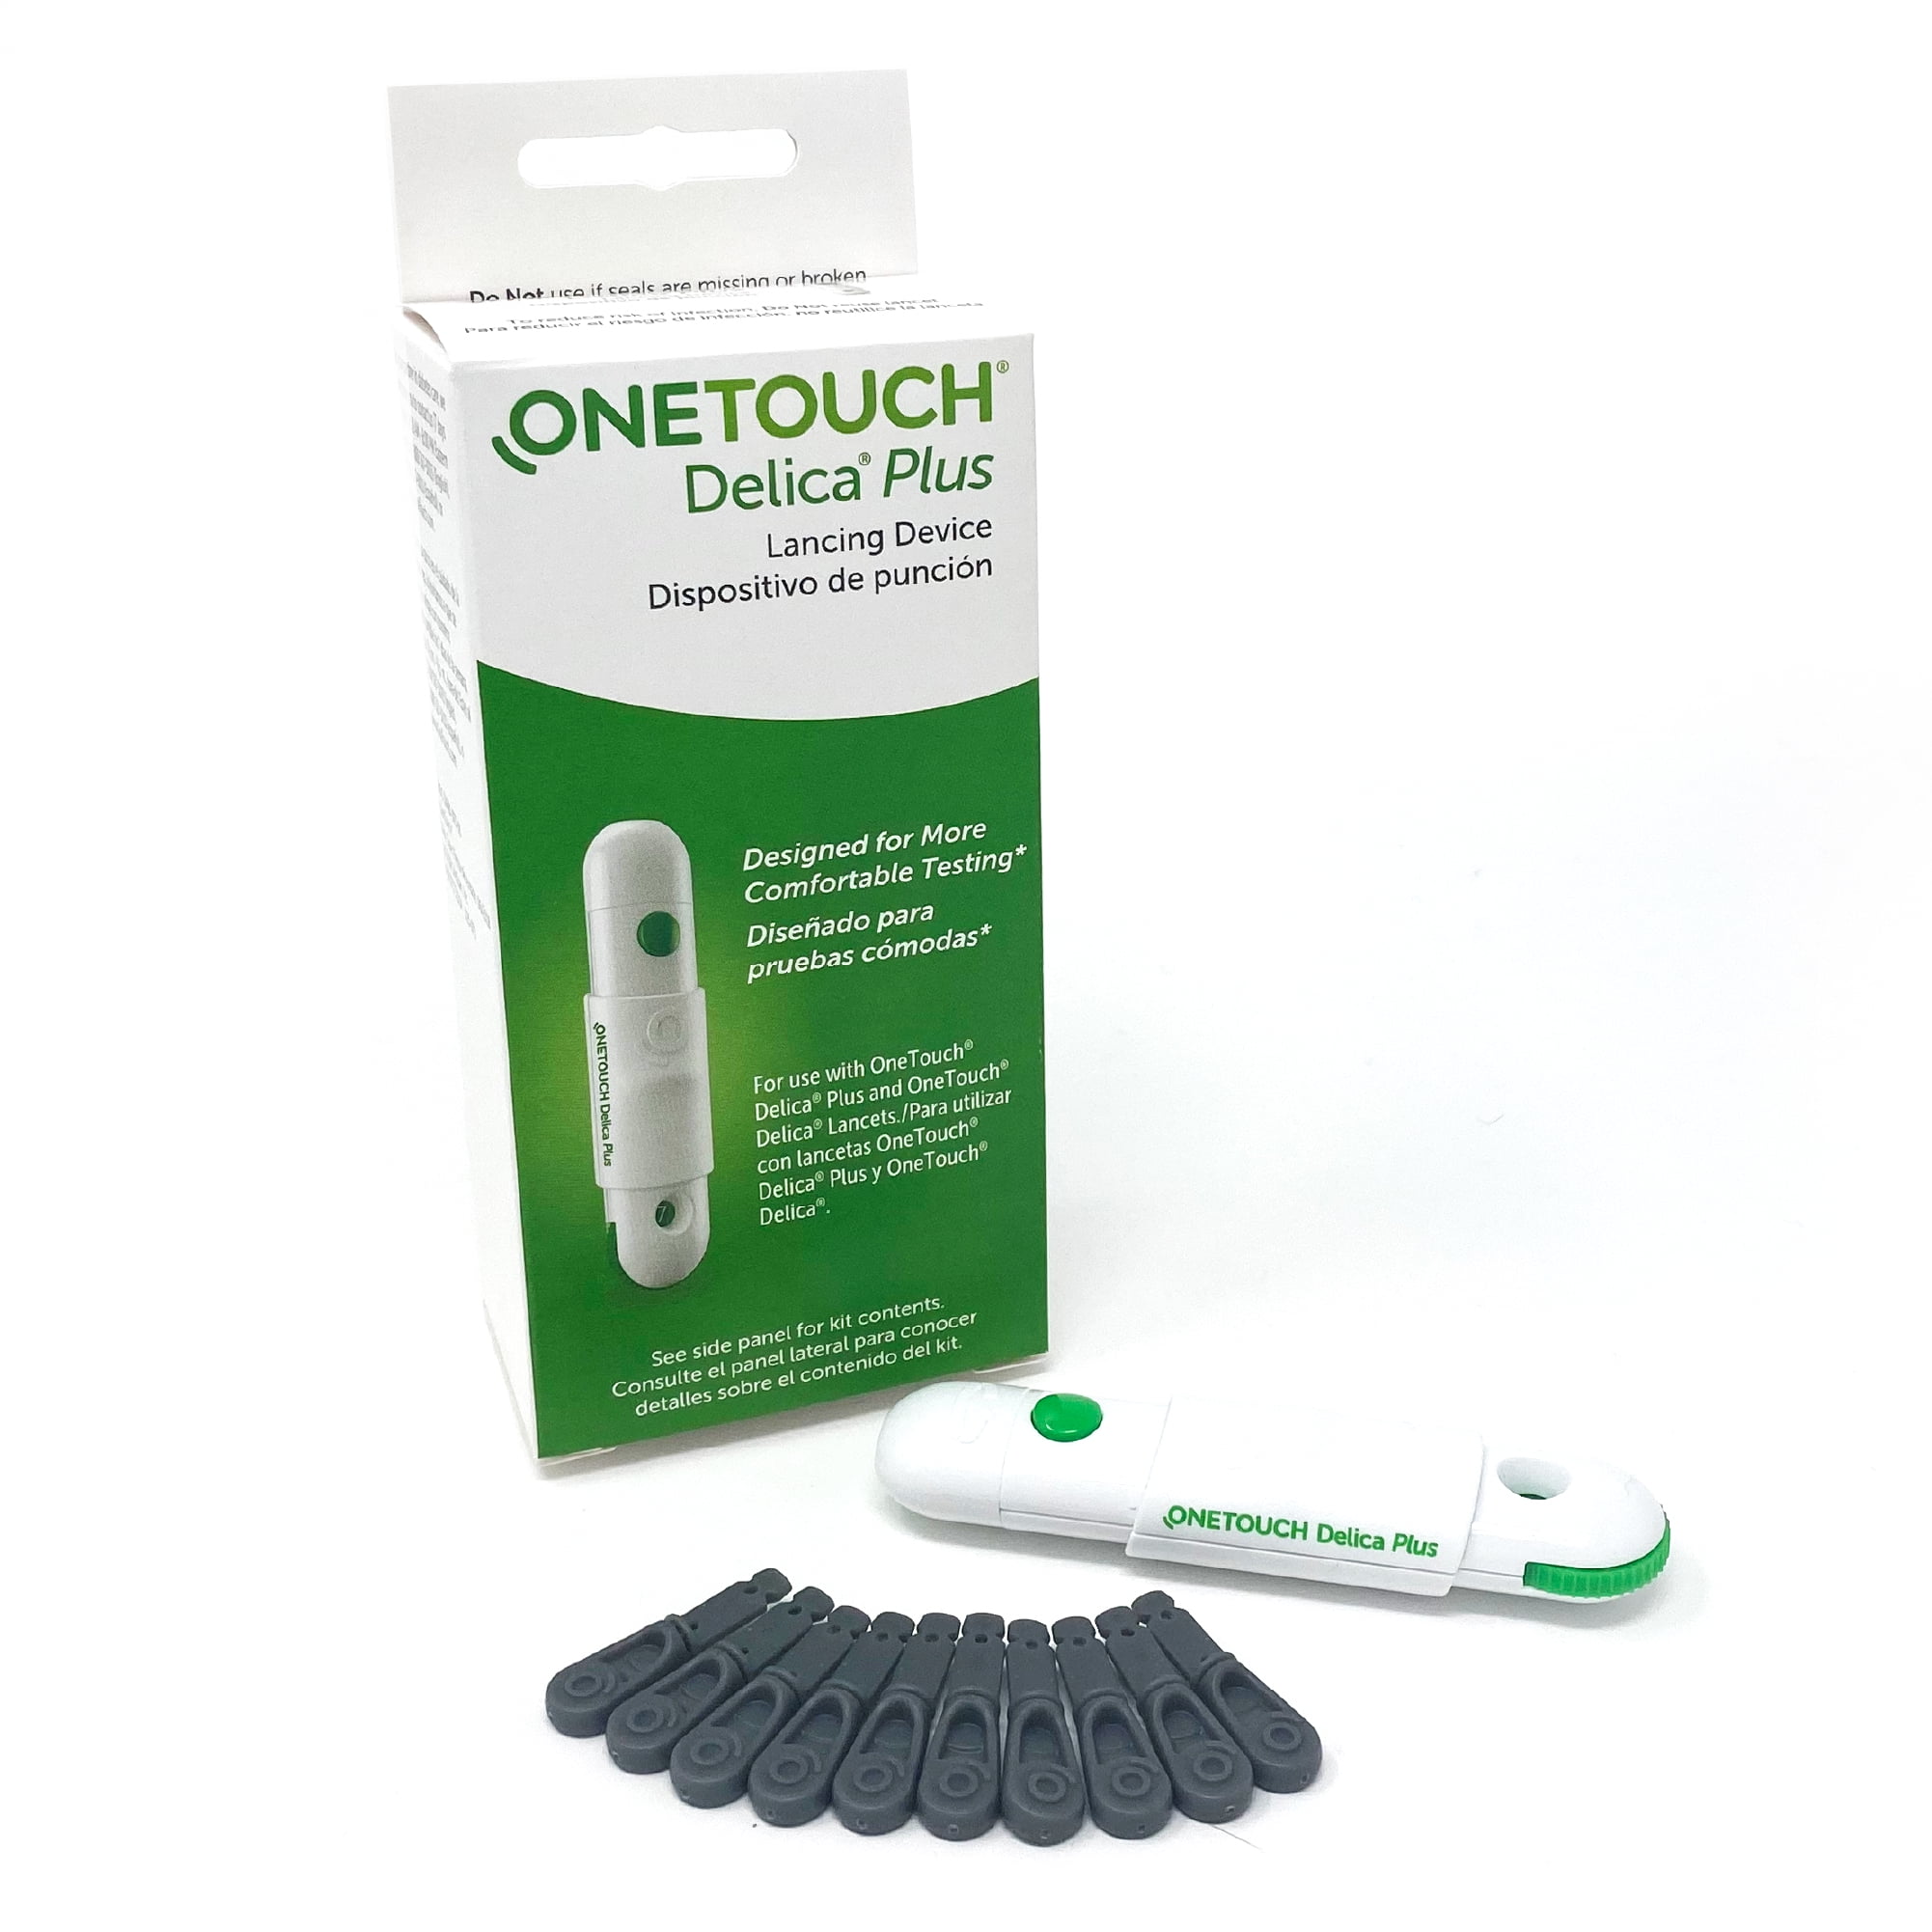 The OneTouch® Delica® Safety